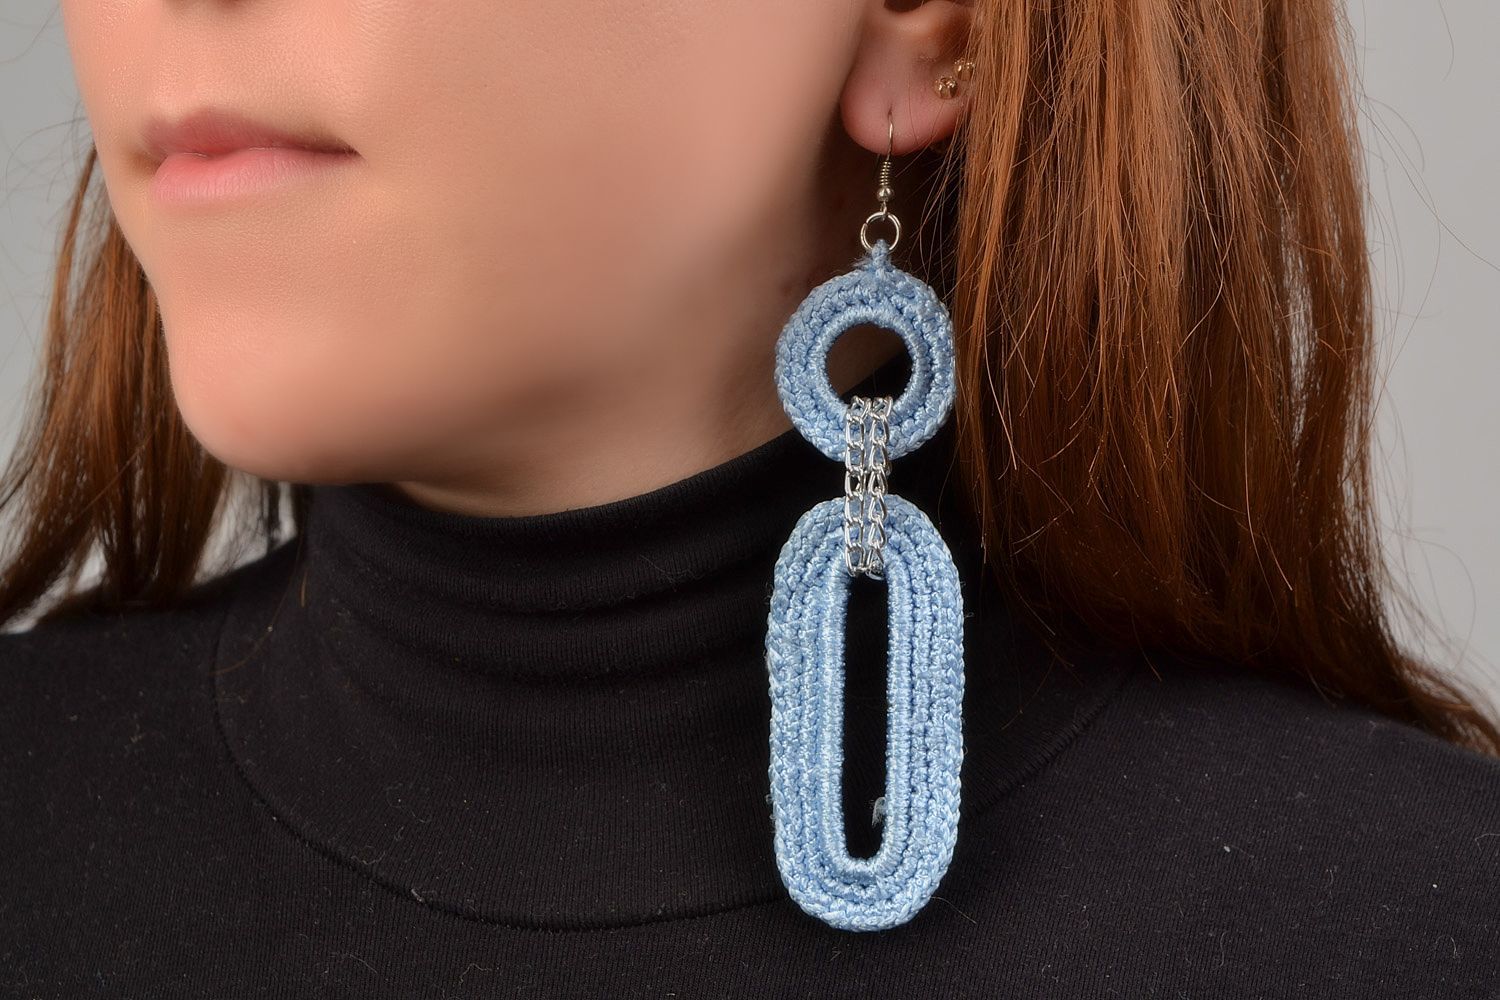 Handmade earrings with metal basis woven over with blue viscose threads photo 1